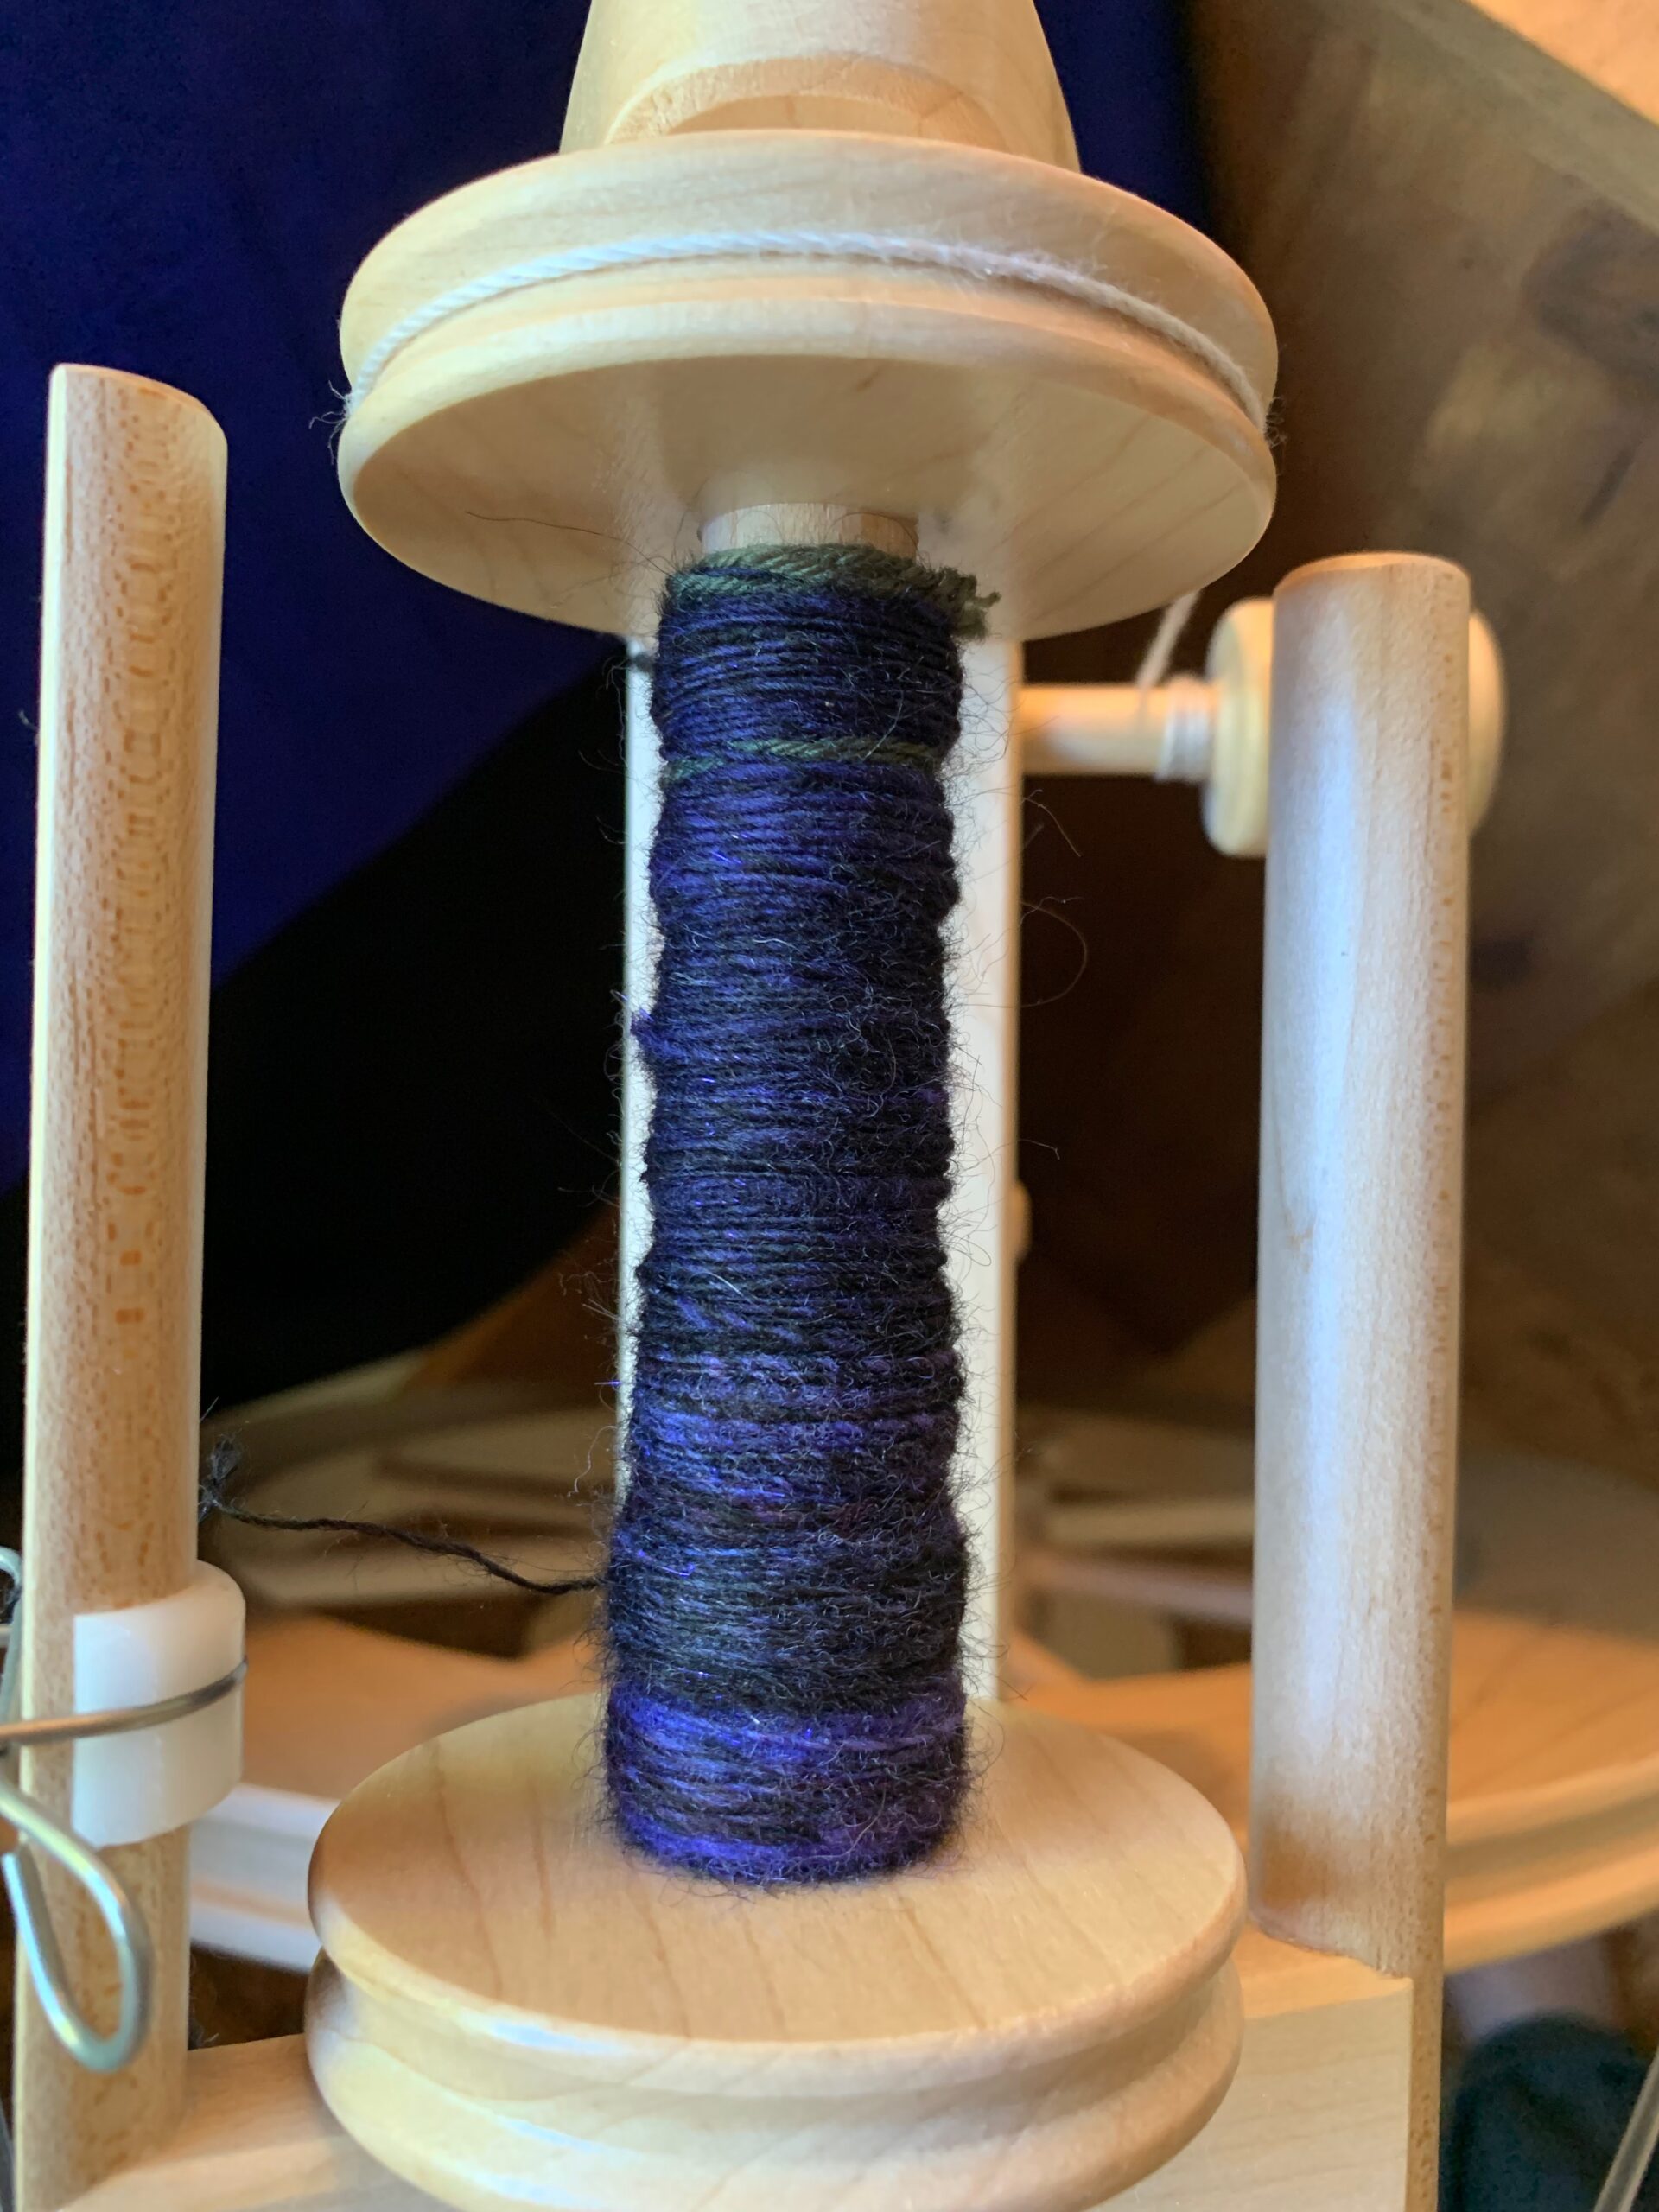 Top-down view of the bobbin and flyer of a spinning wheel, with a blend of black and dark purple singles wound on it, and some green yarn that is the leader that attaches the new yarn to the bobbin.